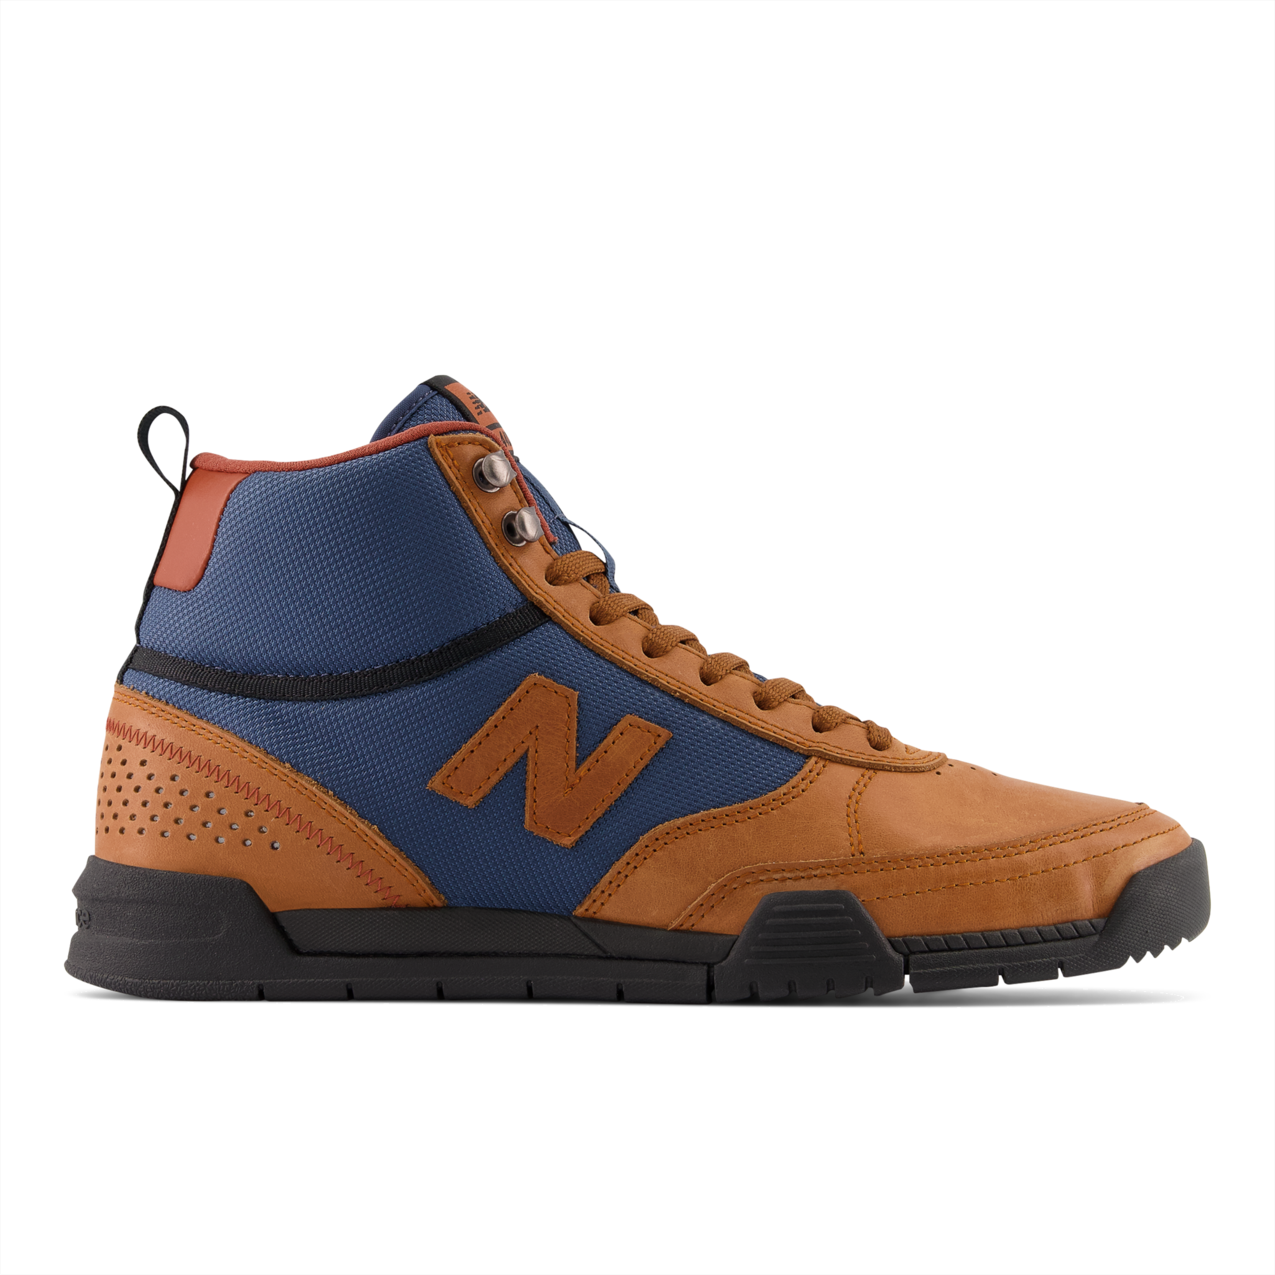 New Balance Numeric Men's 440 Trail Brown Navy Shoes